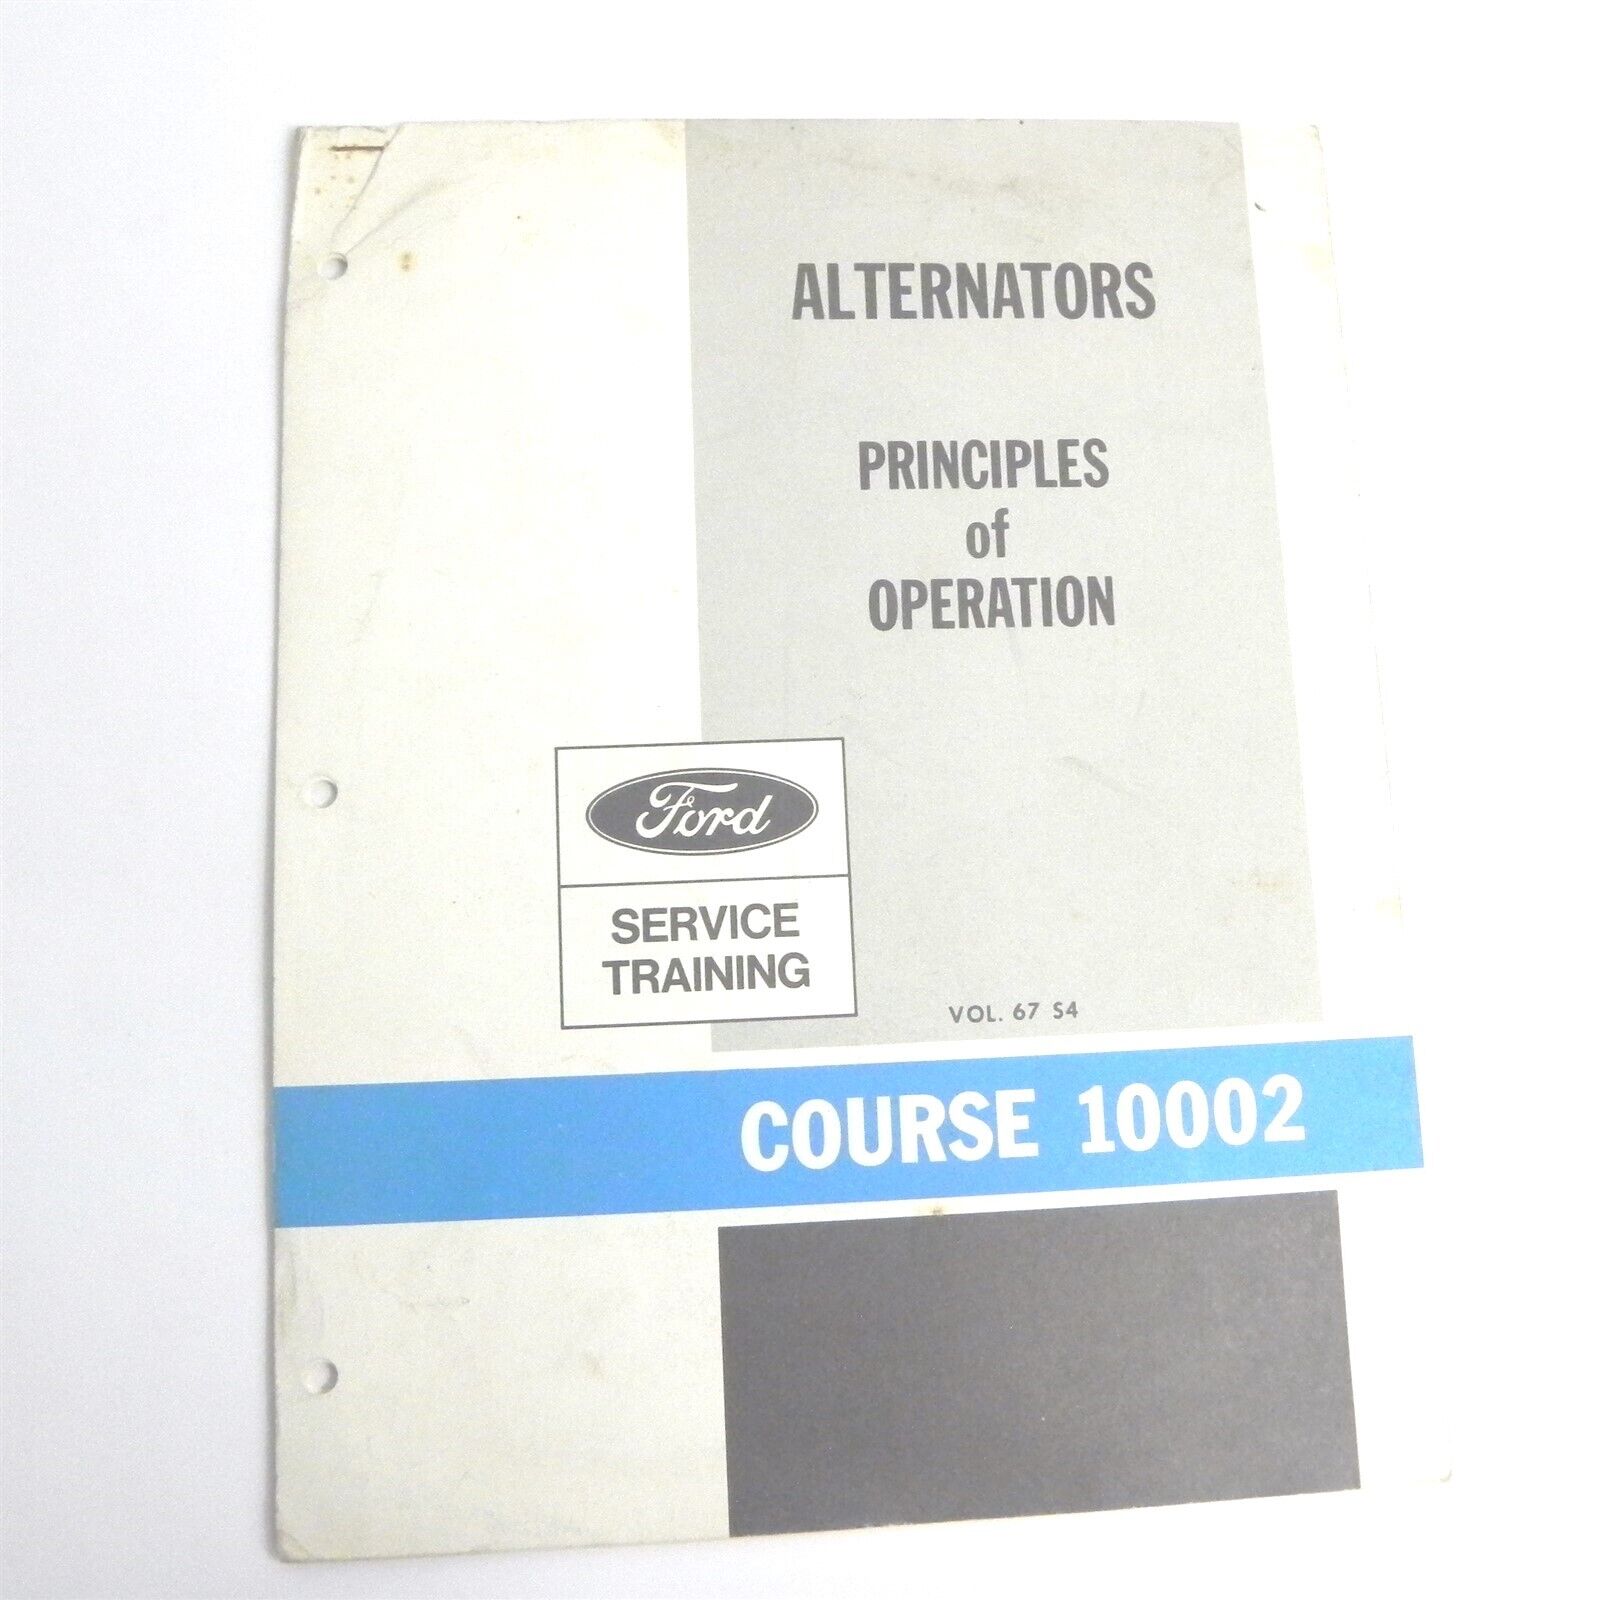 VINTAGE FORD SERVICE TRAINING COURSE 10002 ALTERNATORS PRICIPLES OF OPERATION